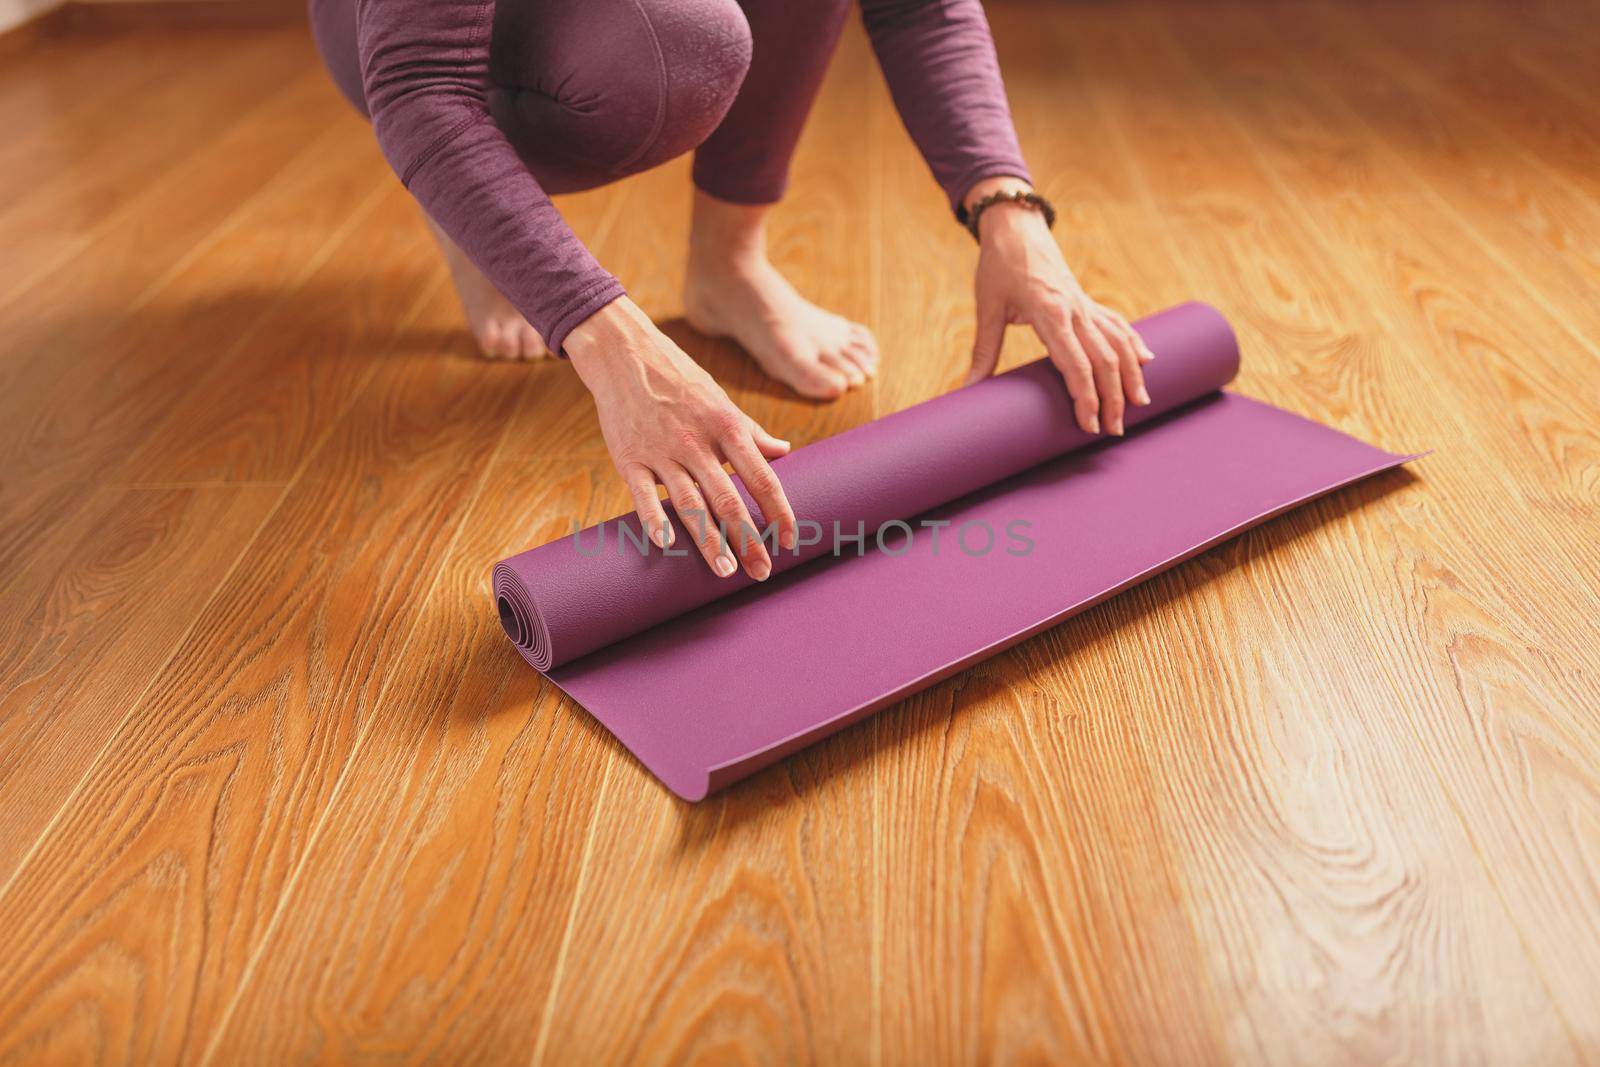 Legs and hands of a woman on a yoga mat practicing asanas. A healthy lifestyle at home in isolation.